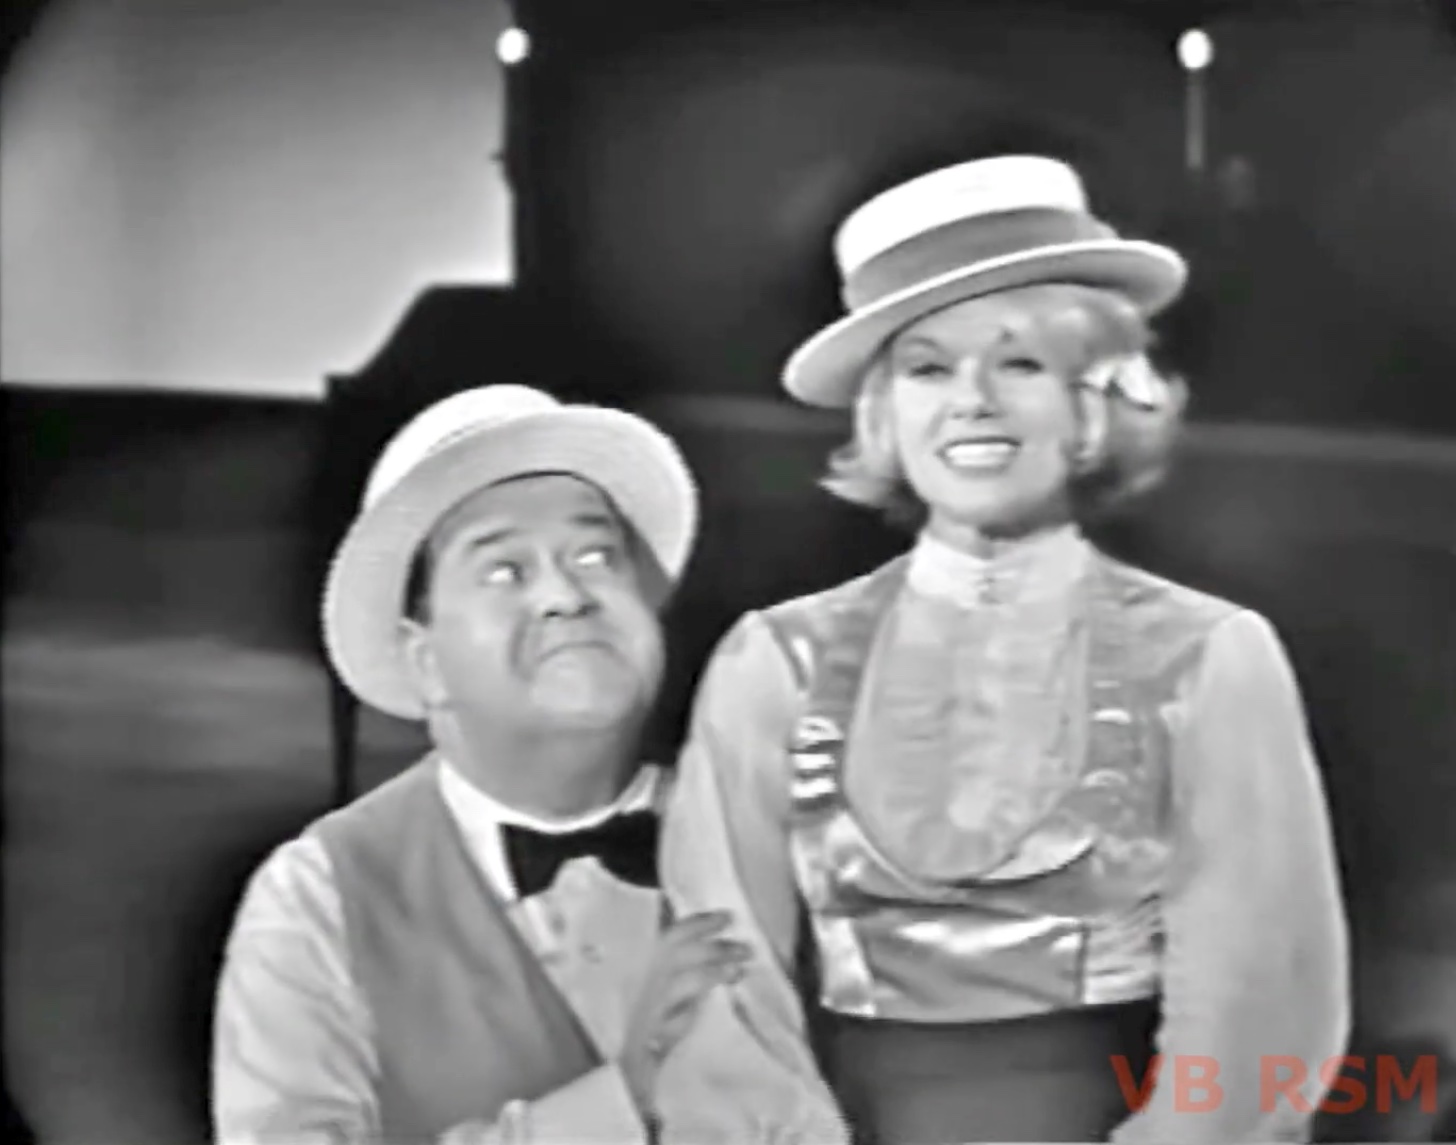 Song lyrics to Teamwork, as performed by Stubby Kaye and Janis Paige on The Red Skelton Hour